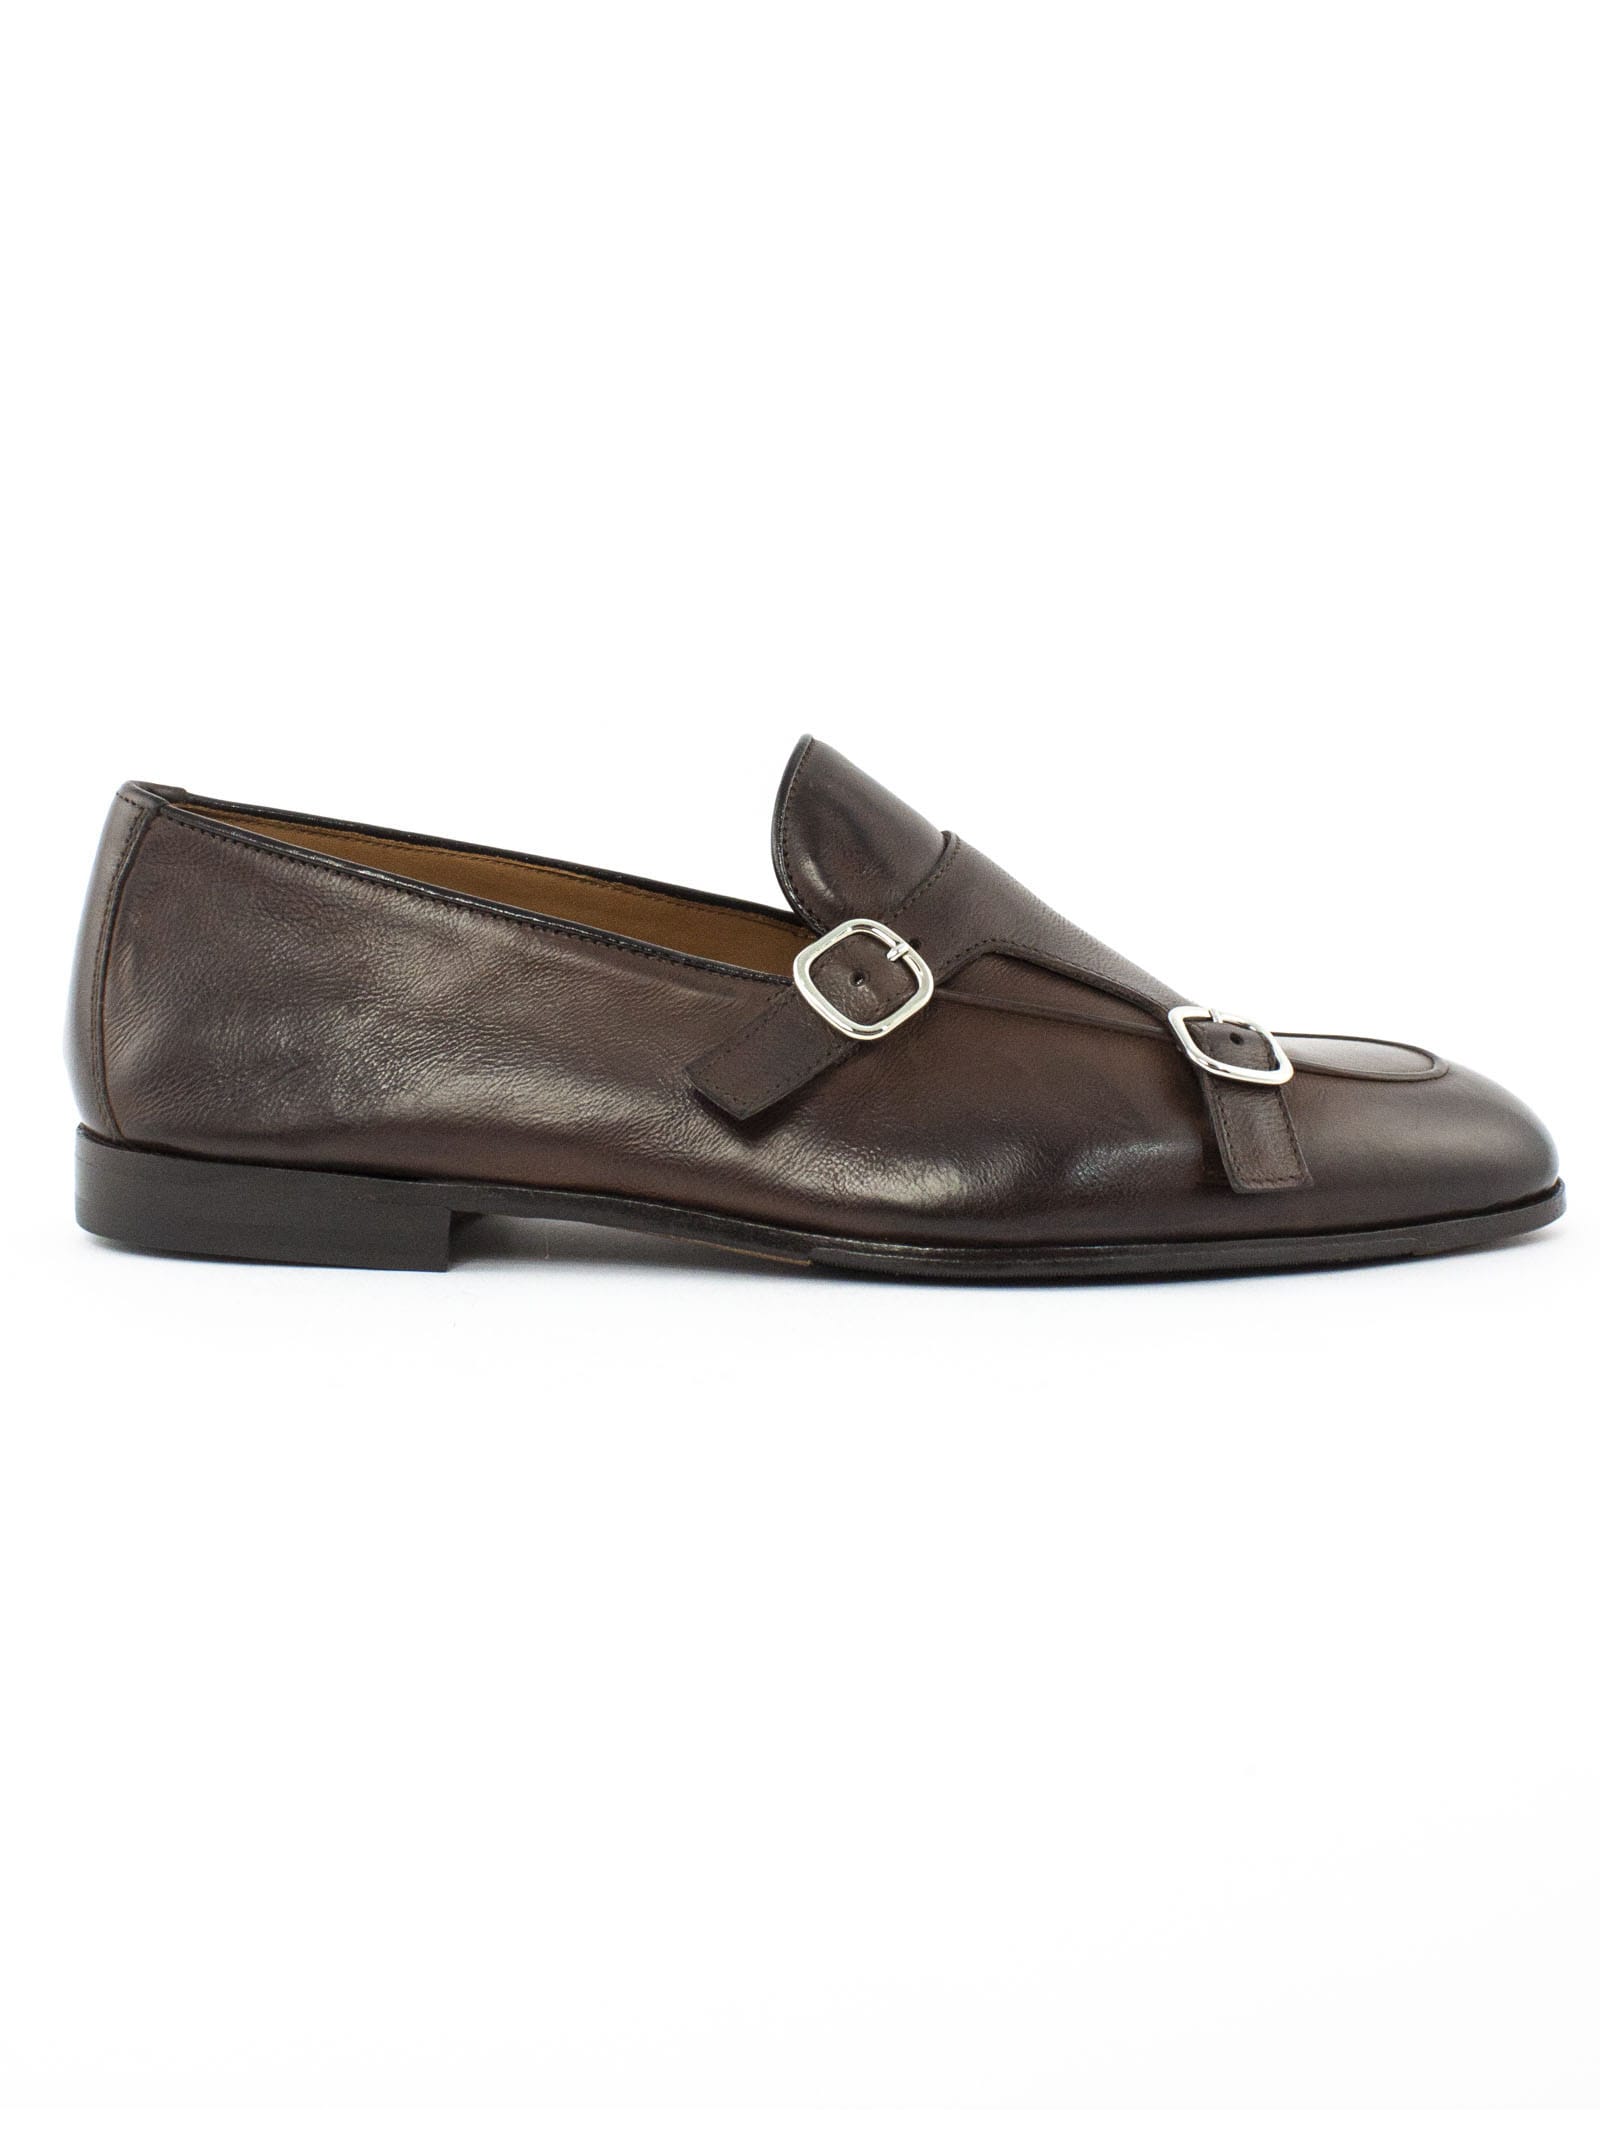 Doucals Brown Leather Loafers